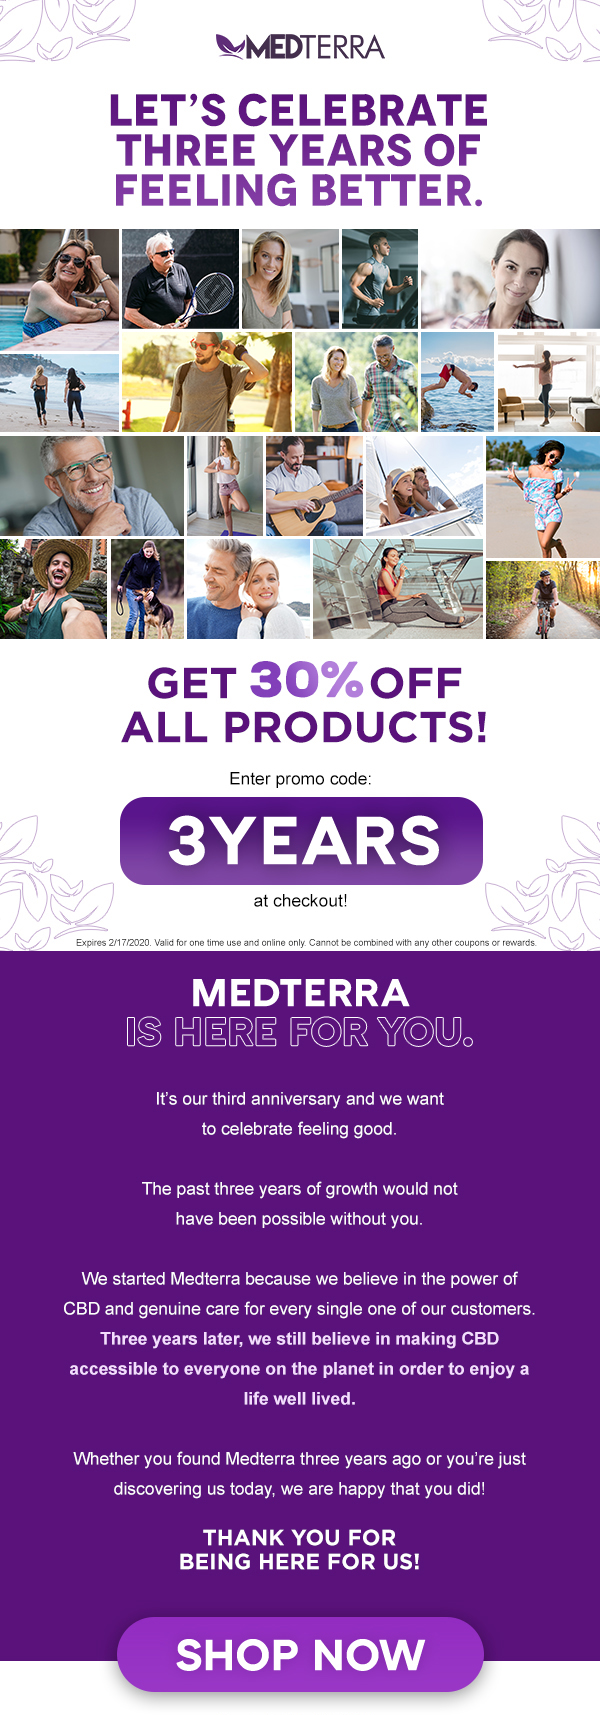 Get 30% off with the code 3YEAR